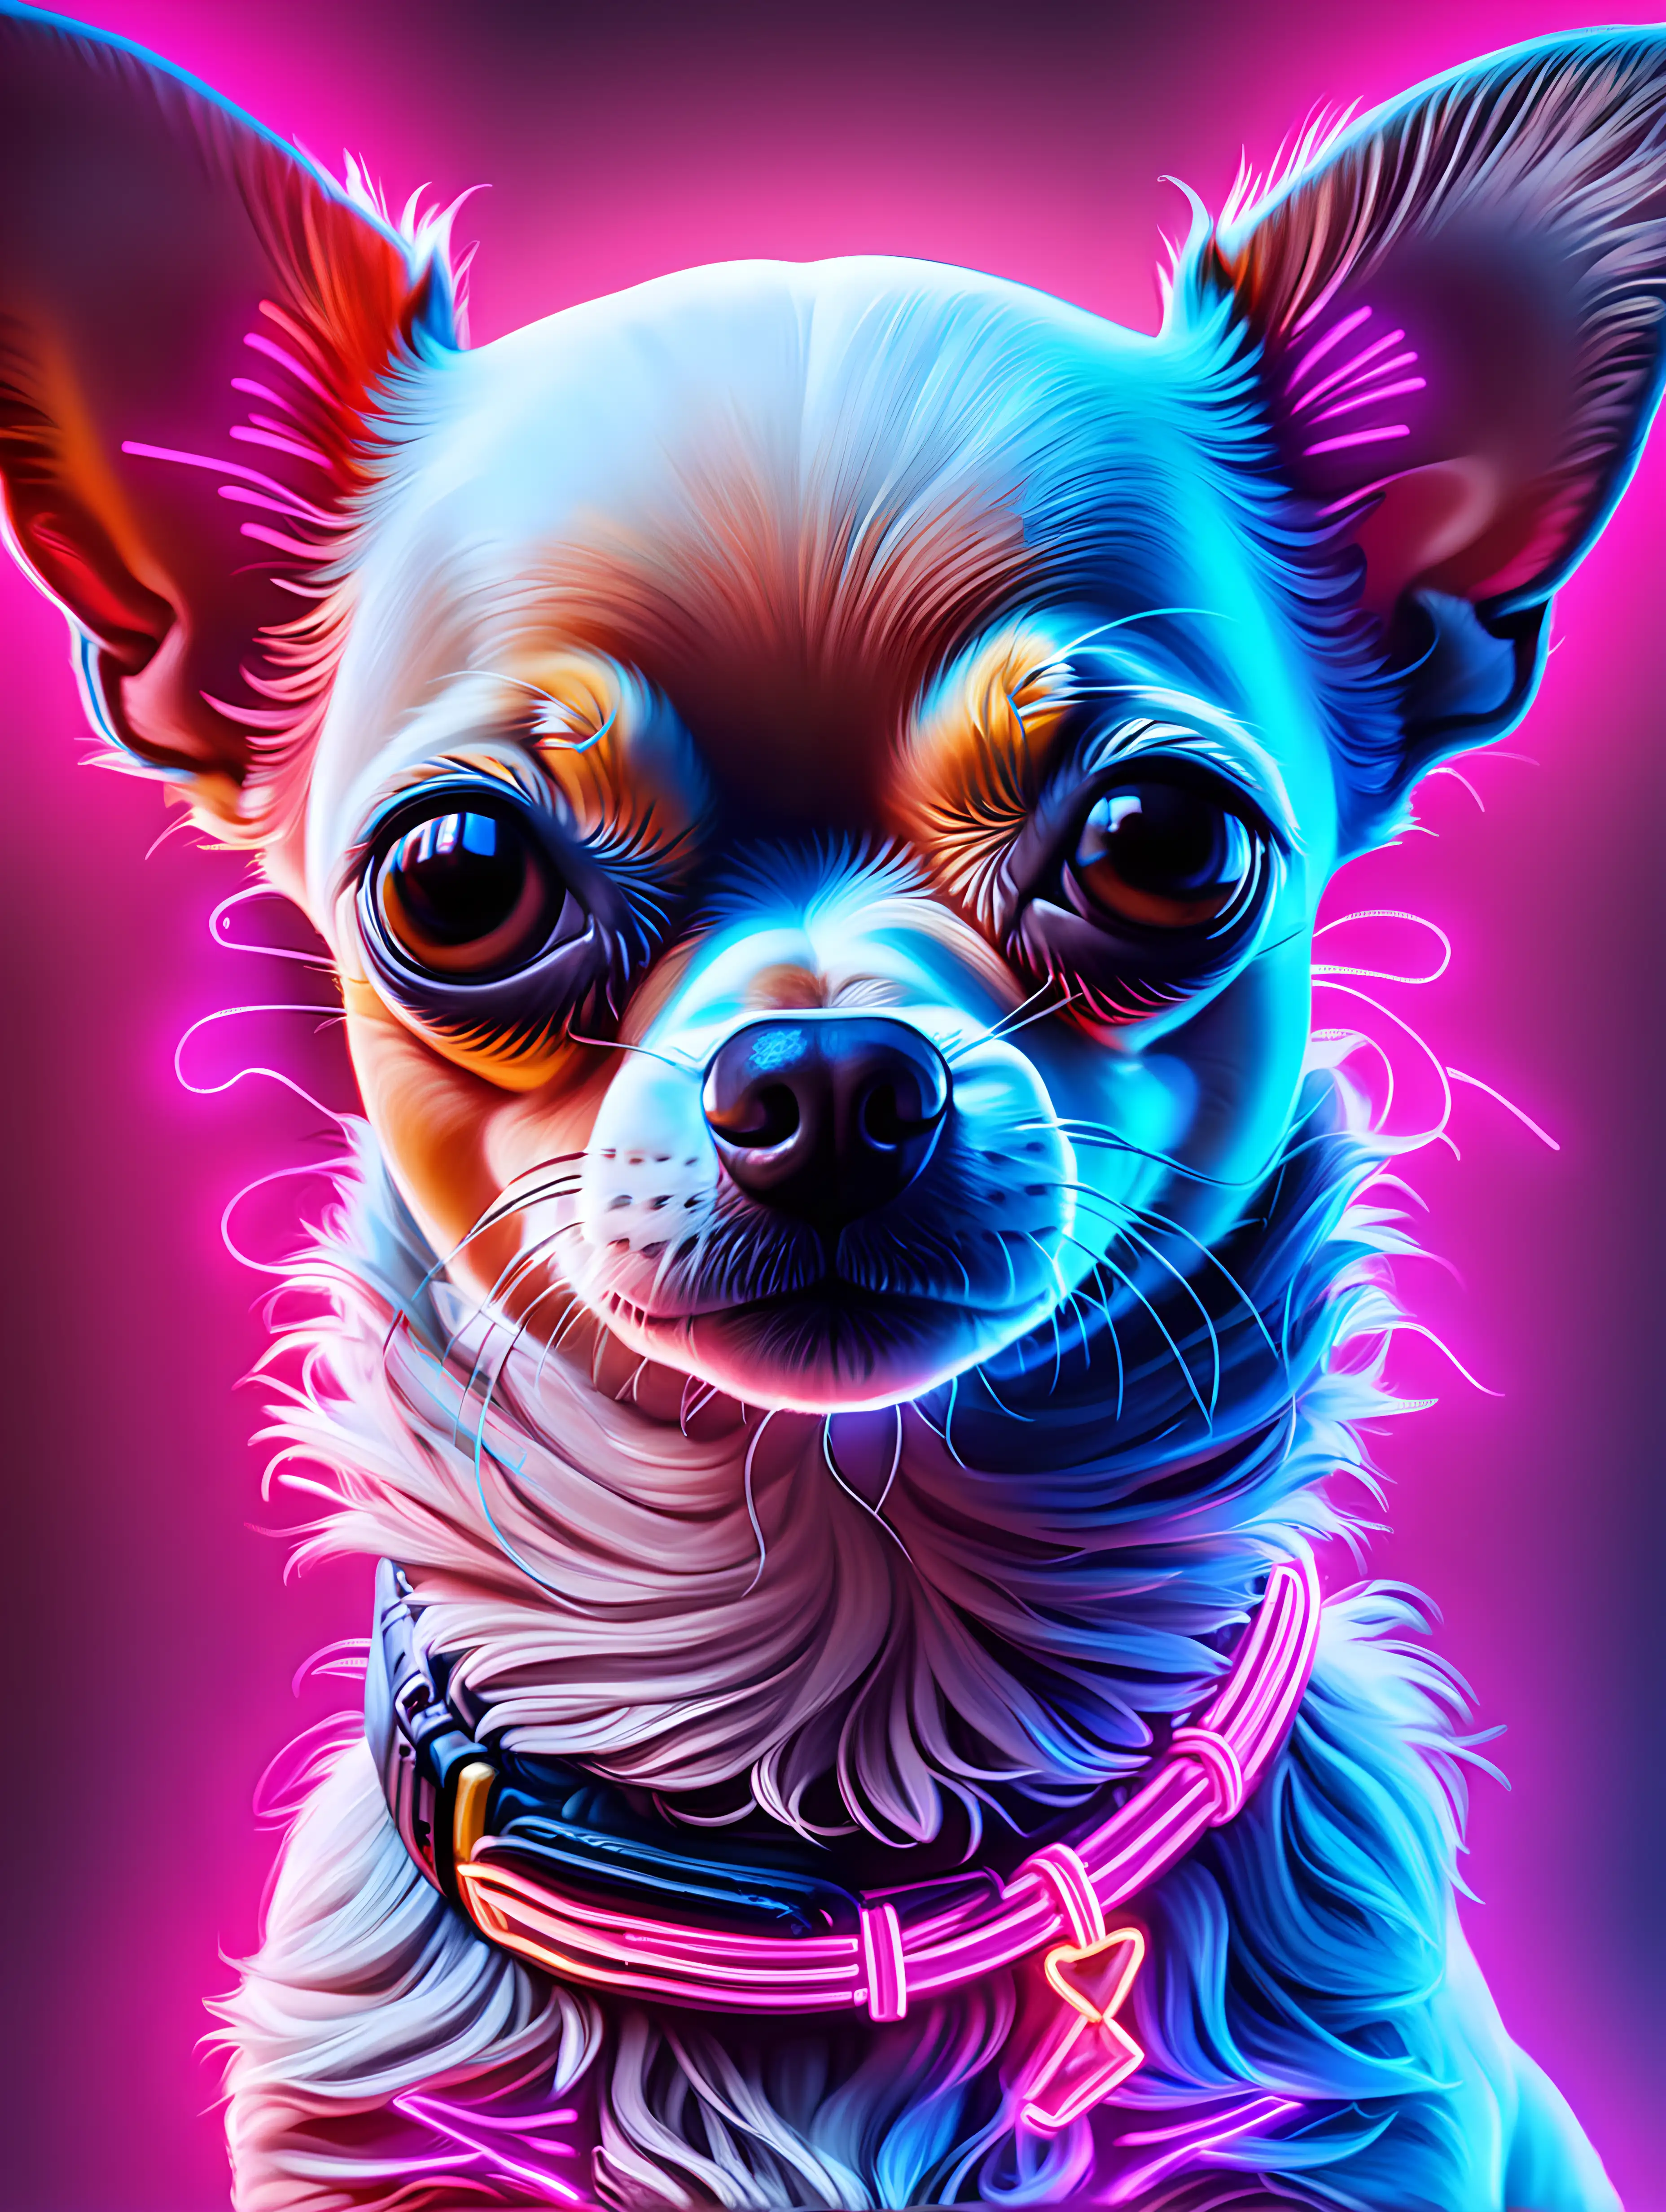 Vibrant 4K Neon Art Featuring a Comfy Chihuahua